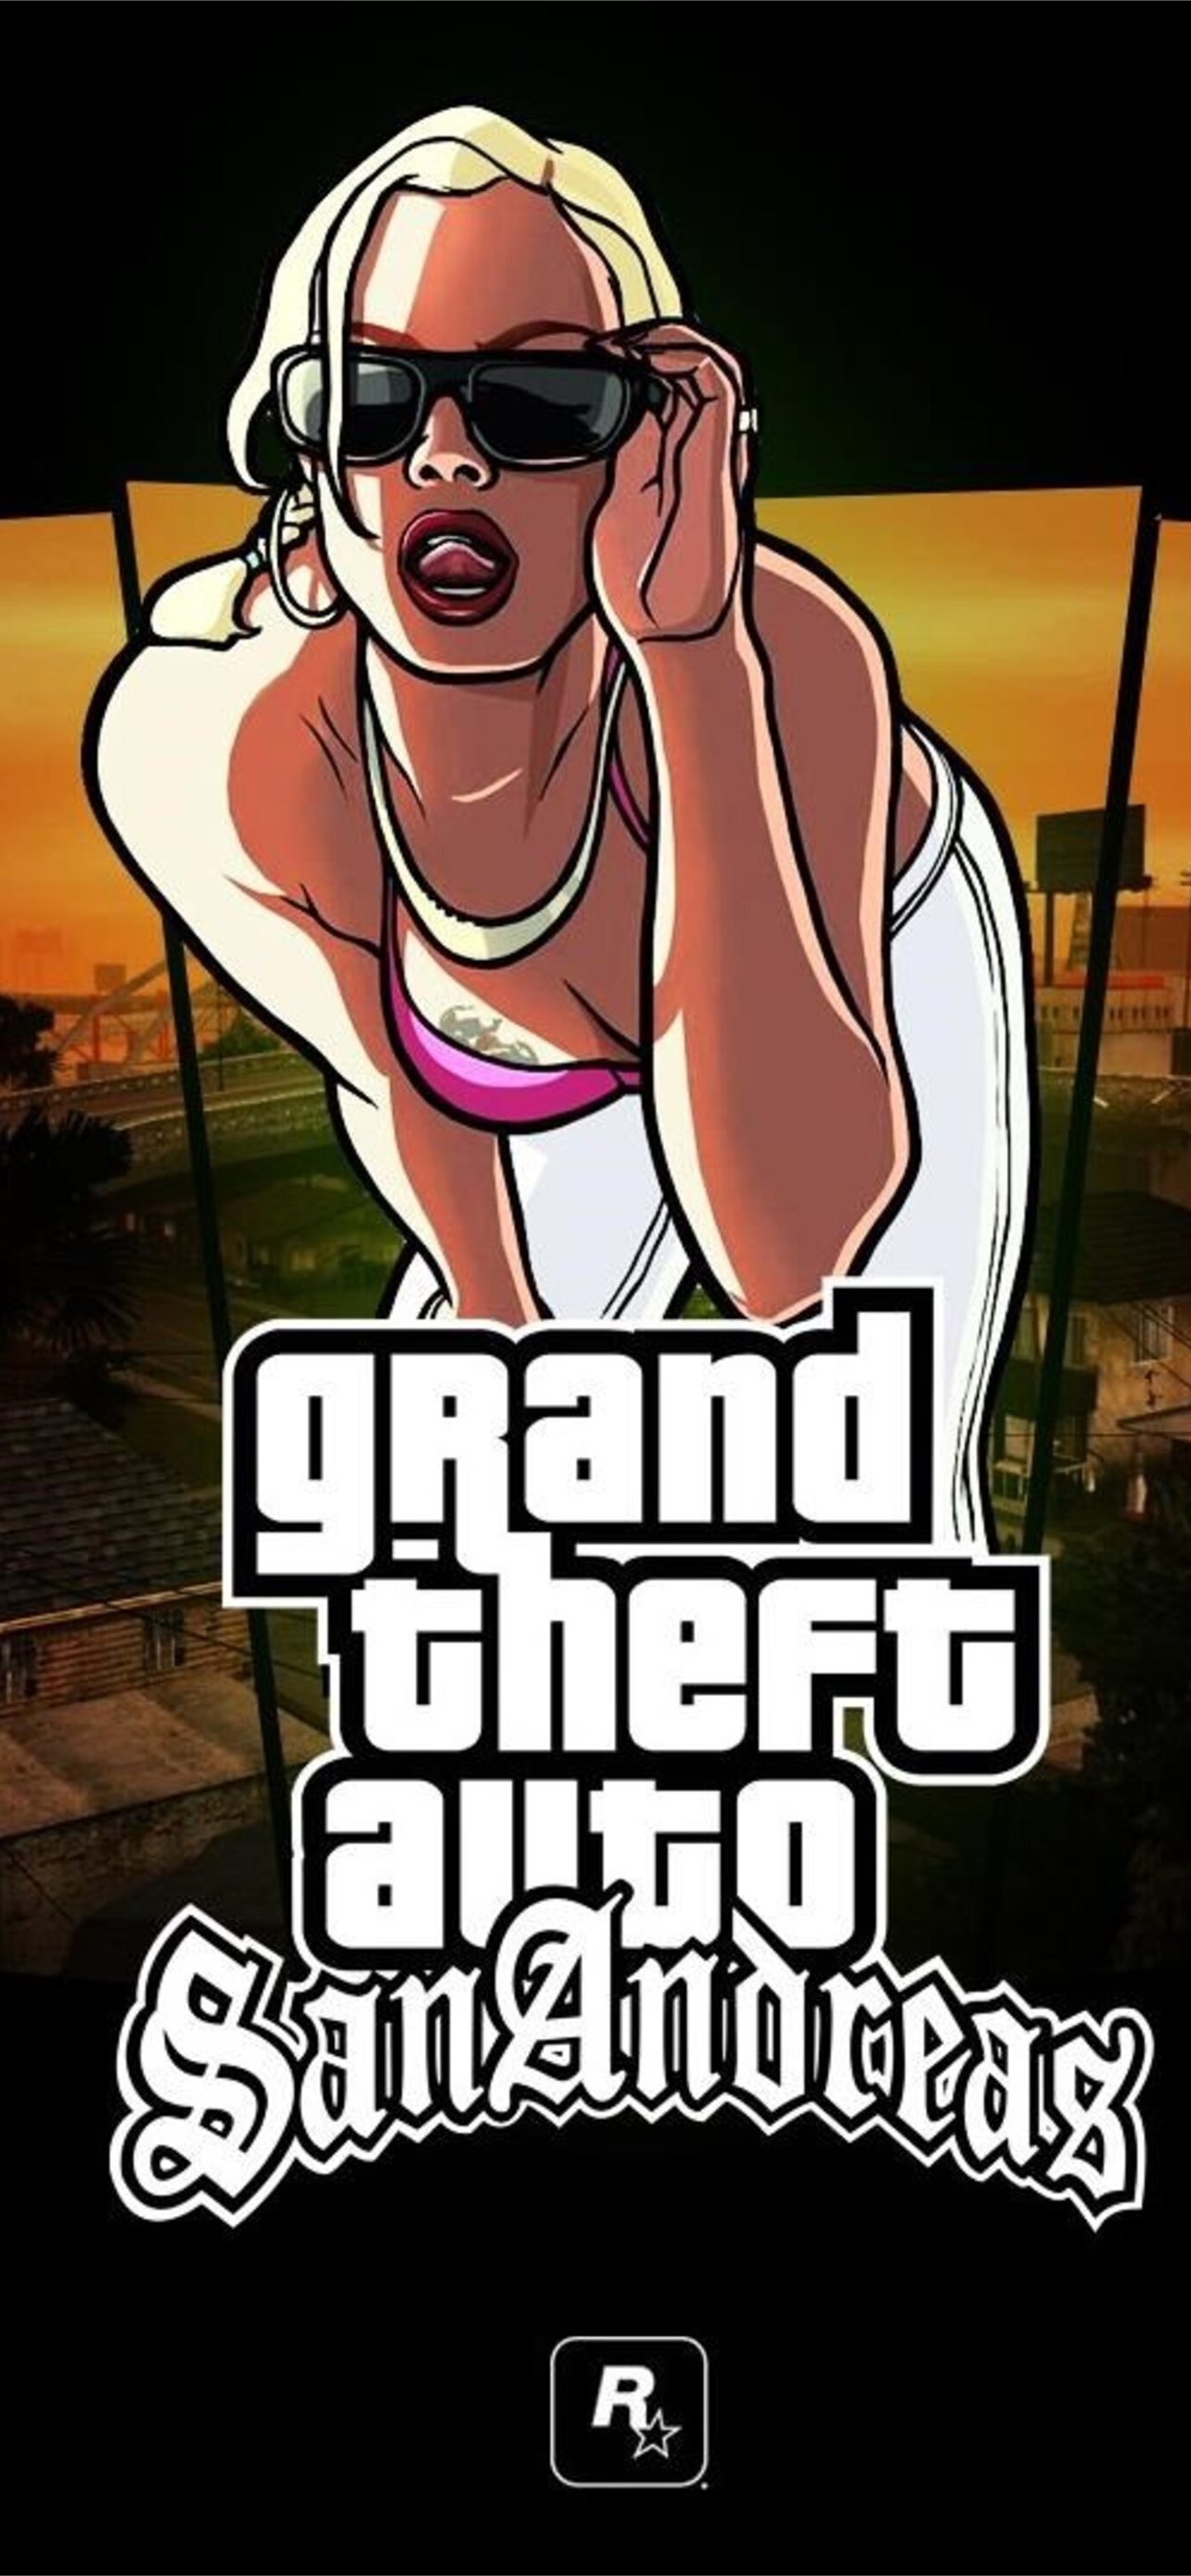 Grand Theft Auto San Andreas, HD iPhone wallpapers, iLikeWallpaper, 1290x2780 HD Phone